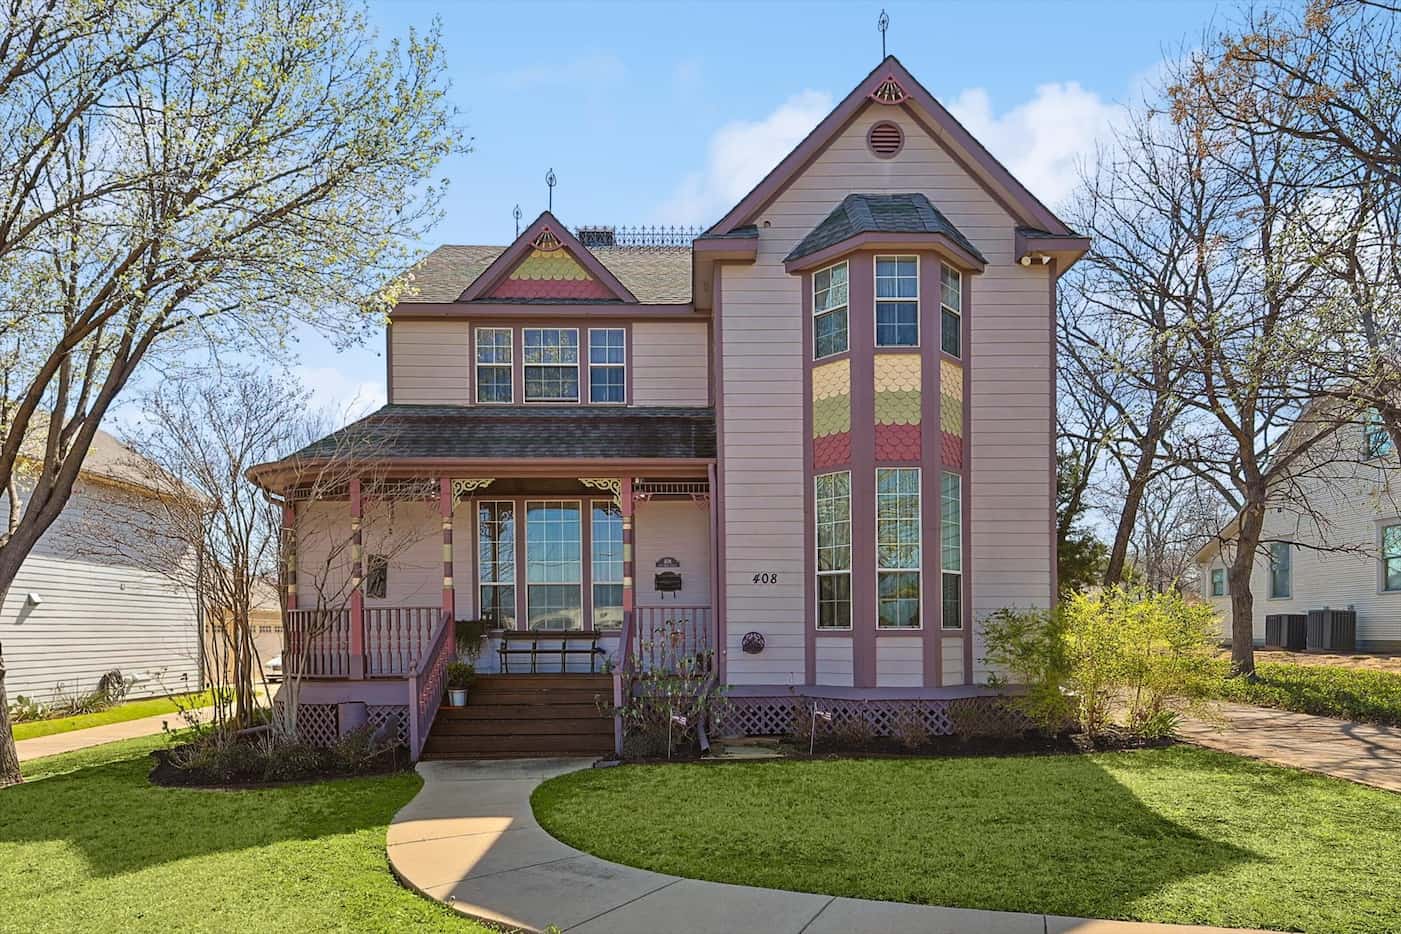 Though it looks like an authentic Victorian-era home, this Grapevine house was built in 2006.